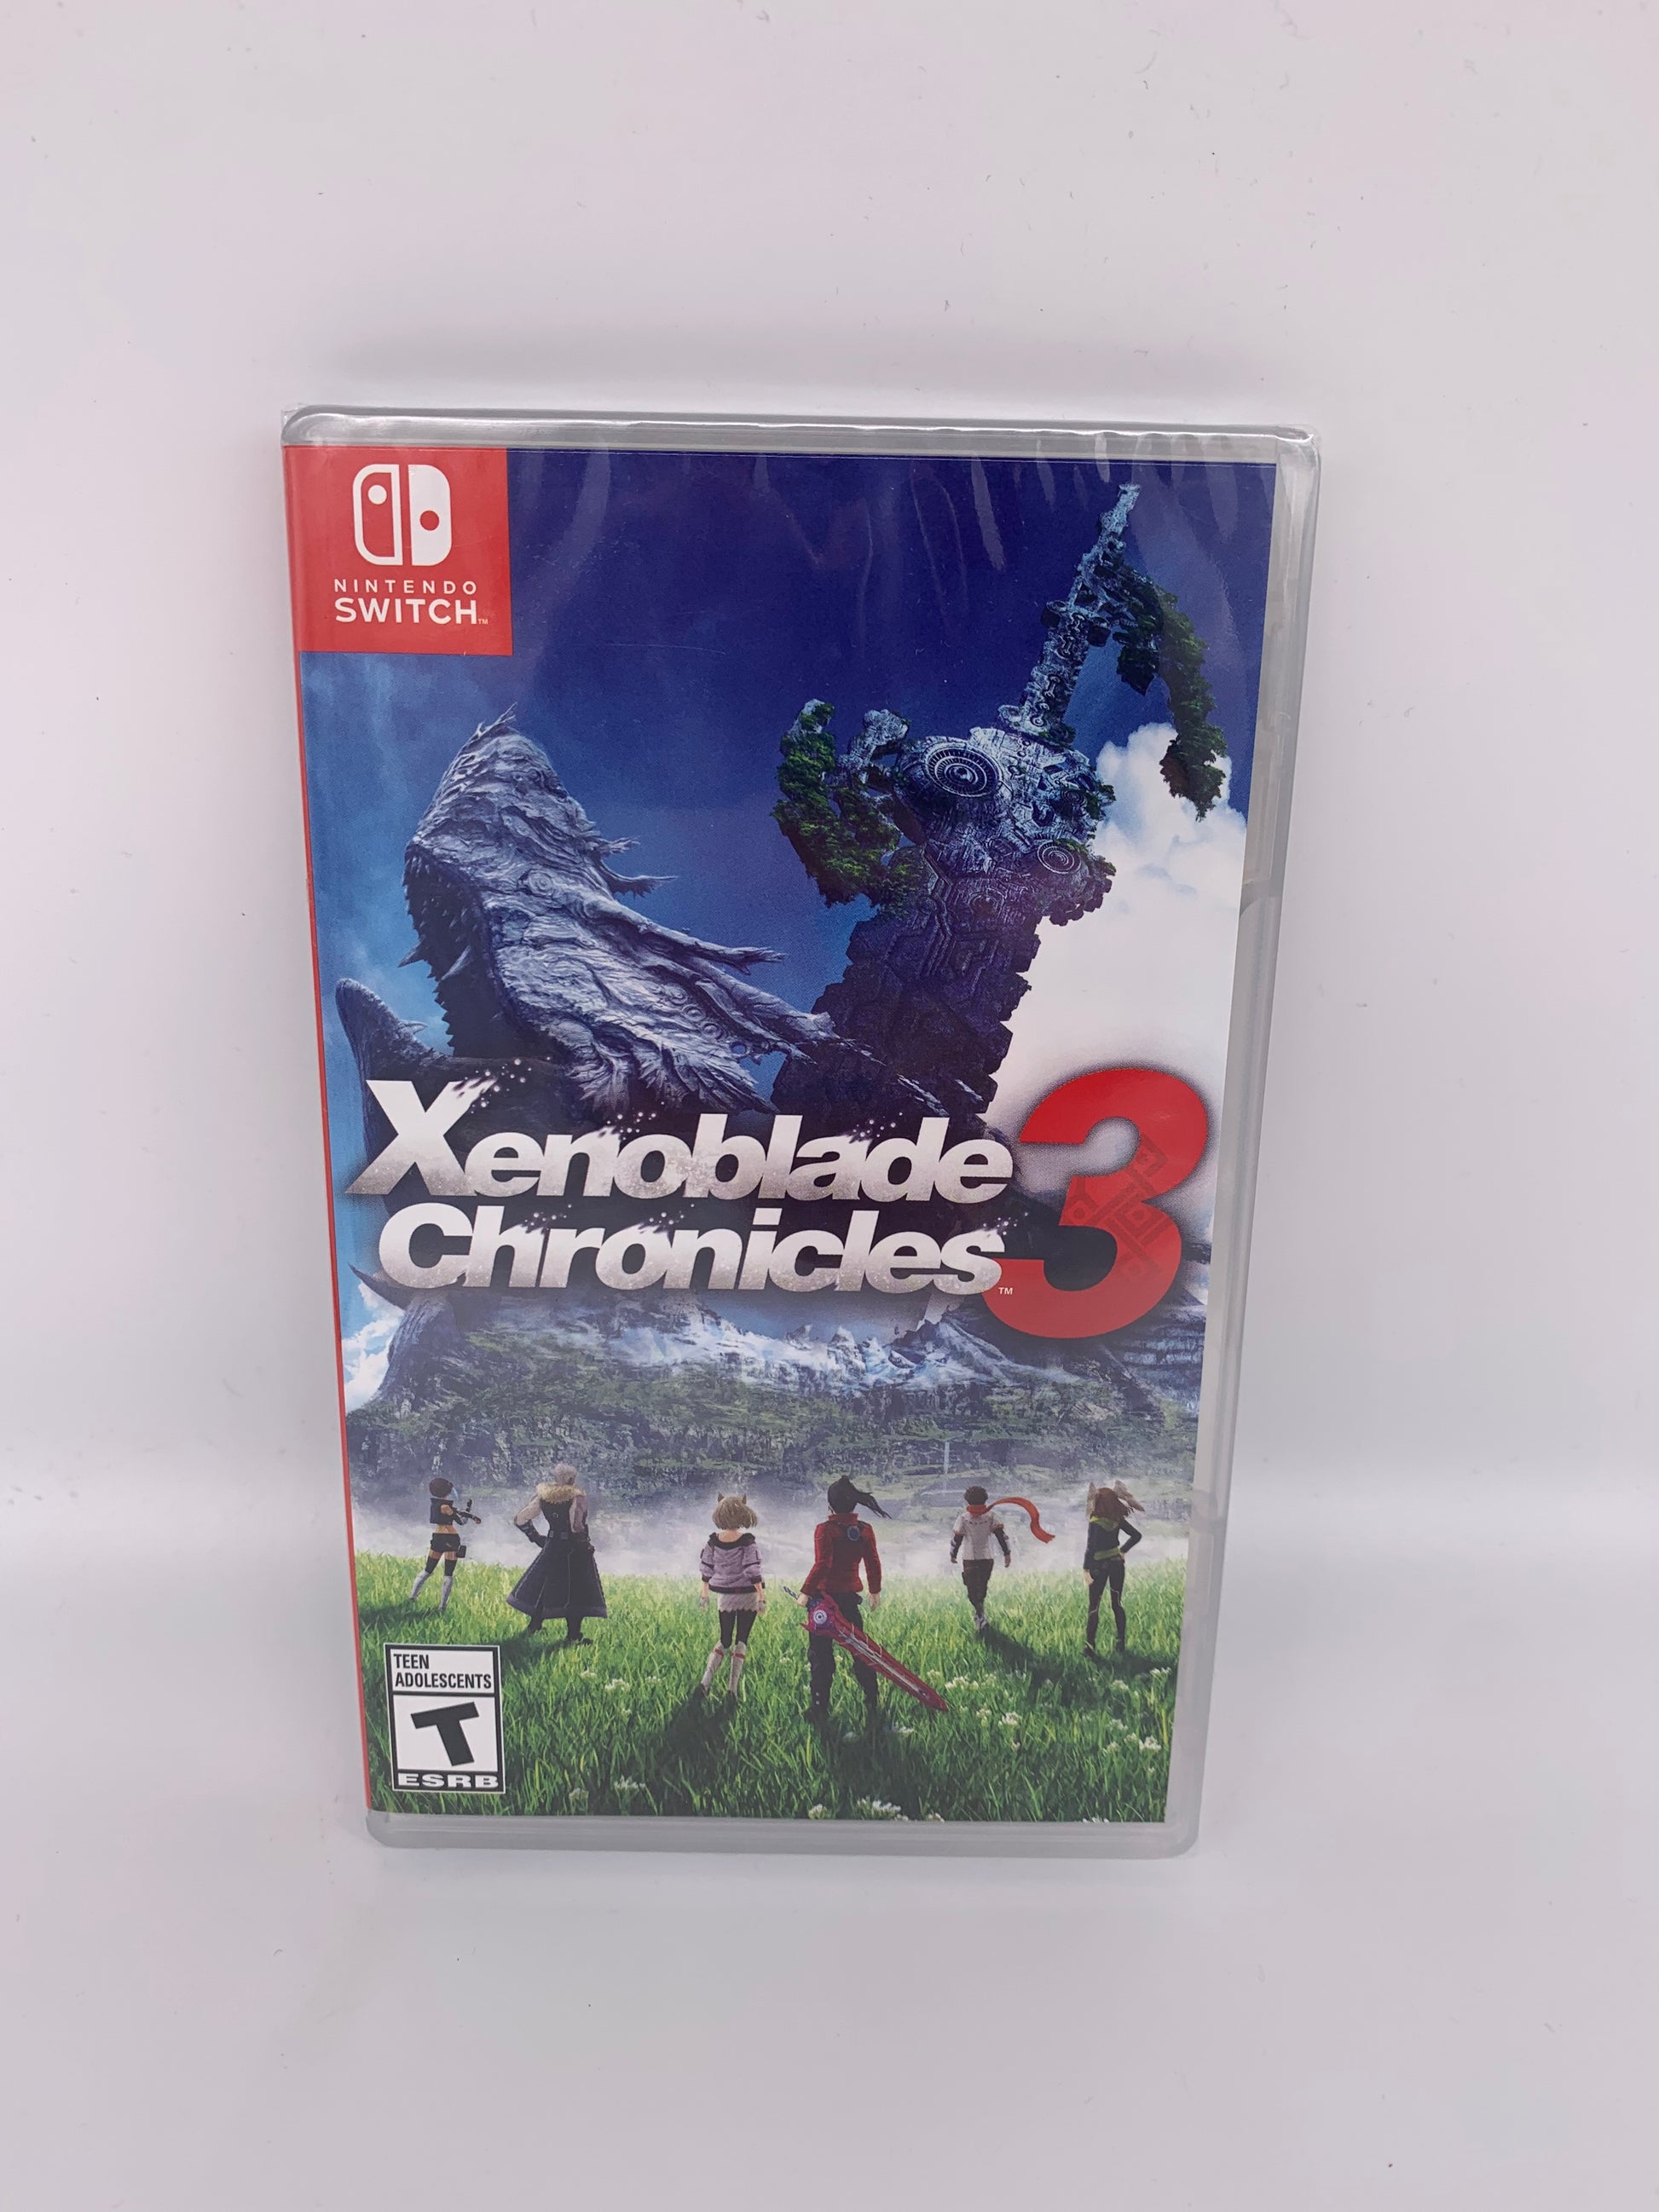 PiXEL-RETRO.COM : NINTENDO SWITCH NEW SEALED IN BOX COMPLETE MANUAL GAME NTSC XENOBLADE CHRONICLES 3